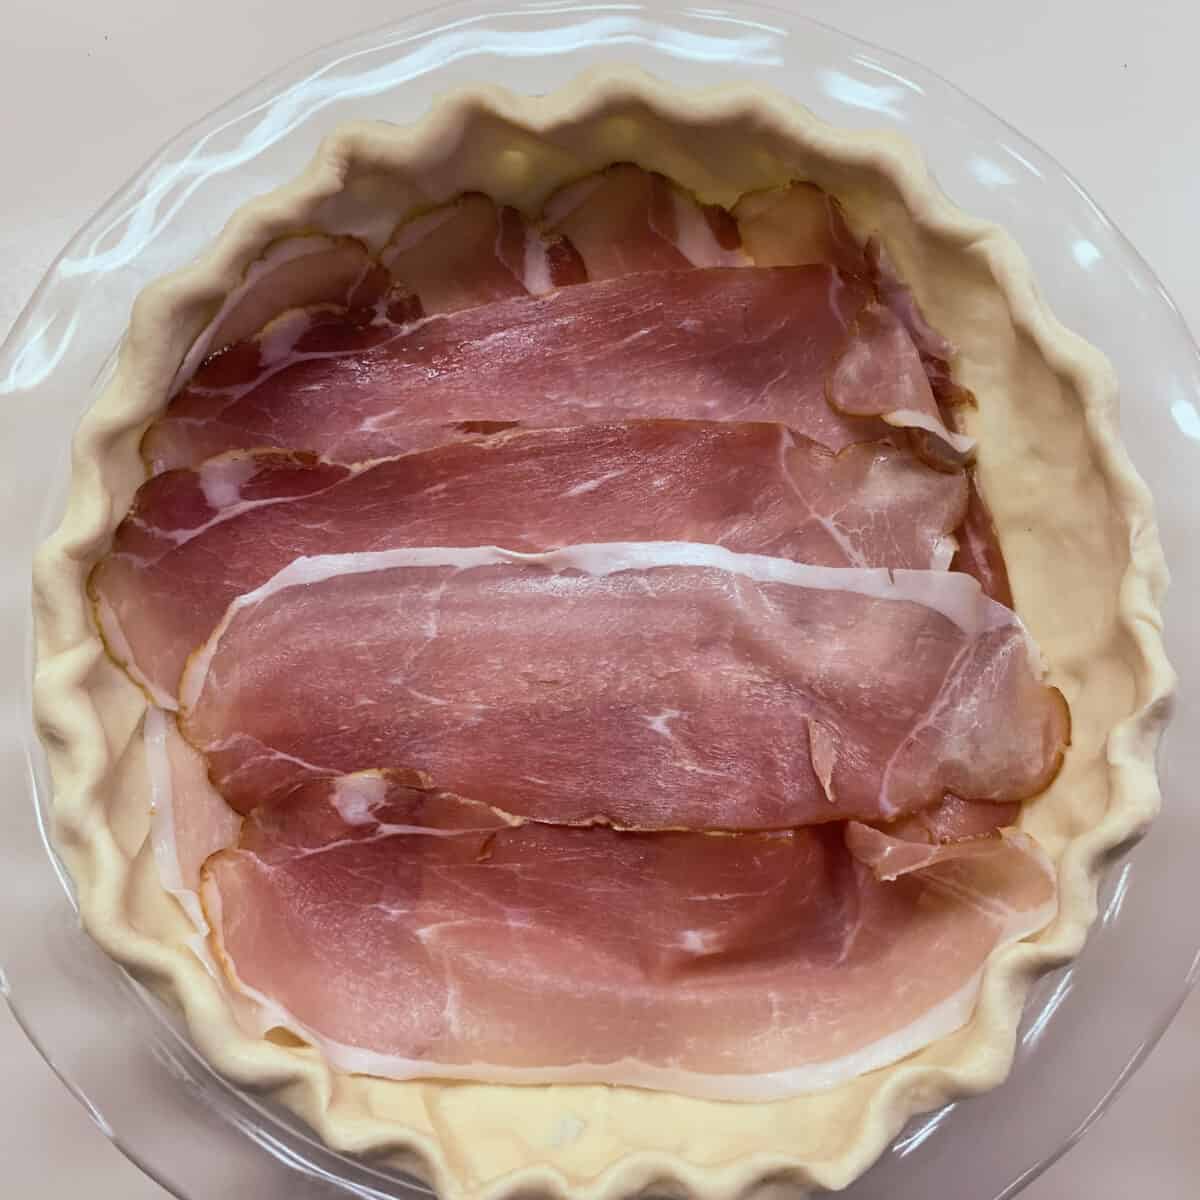 first layer of meat in unbaked pie